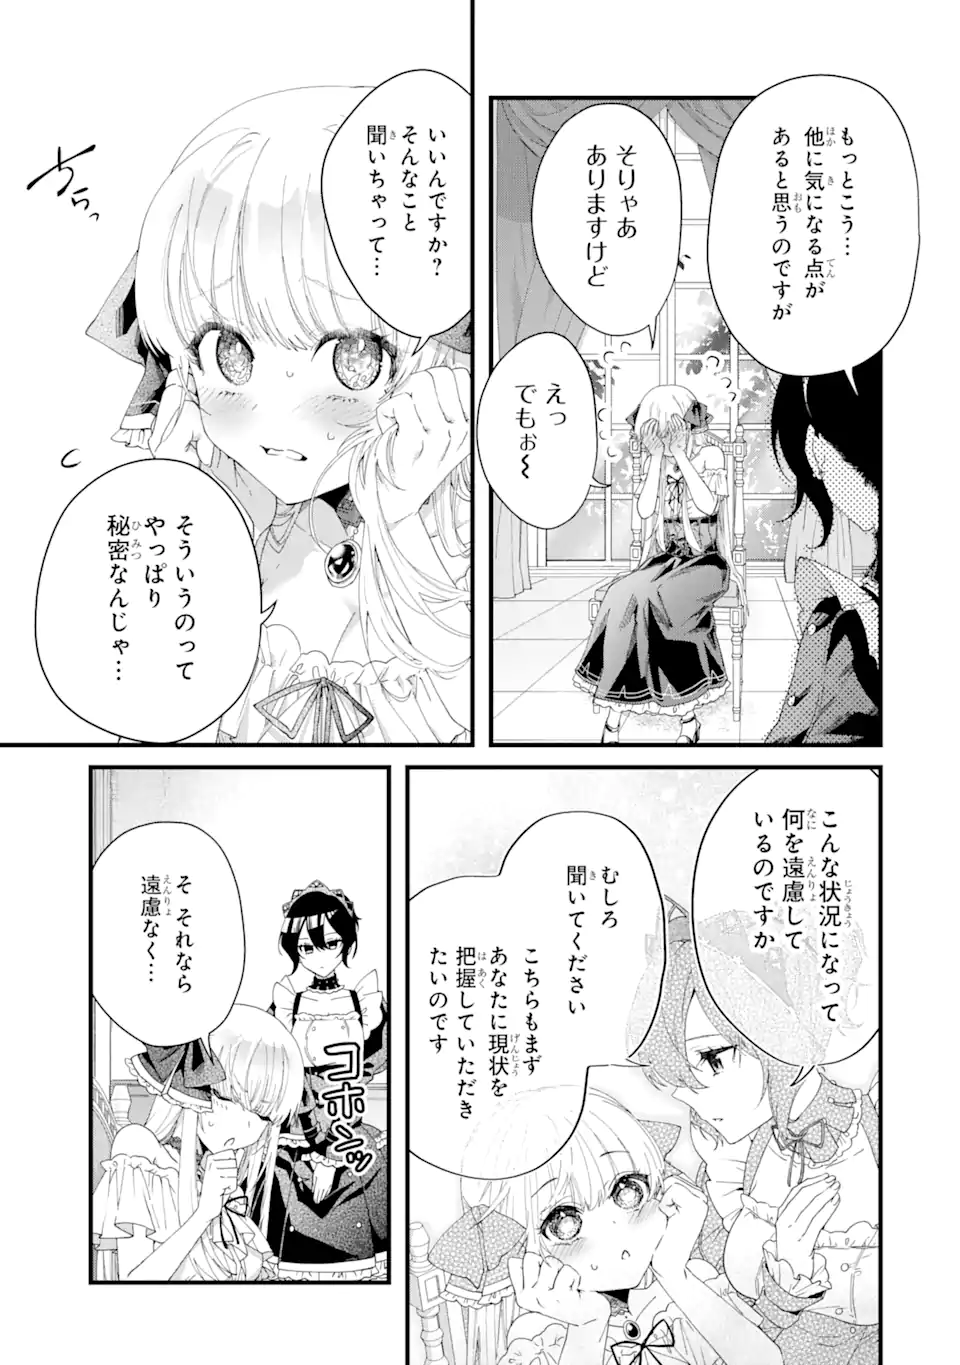 Ousama no Propose - Chapter 1.3 - Page 3